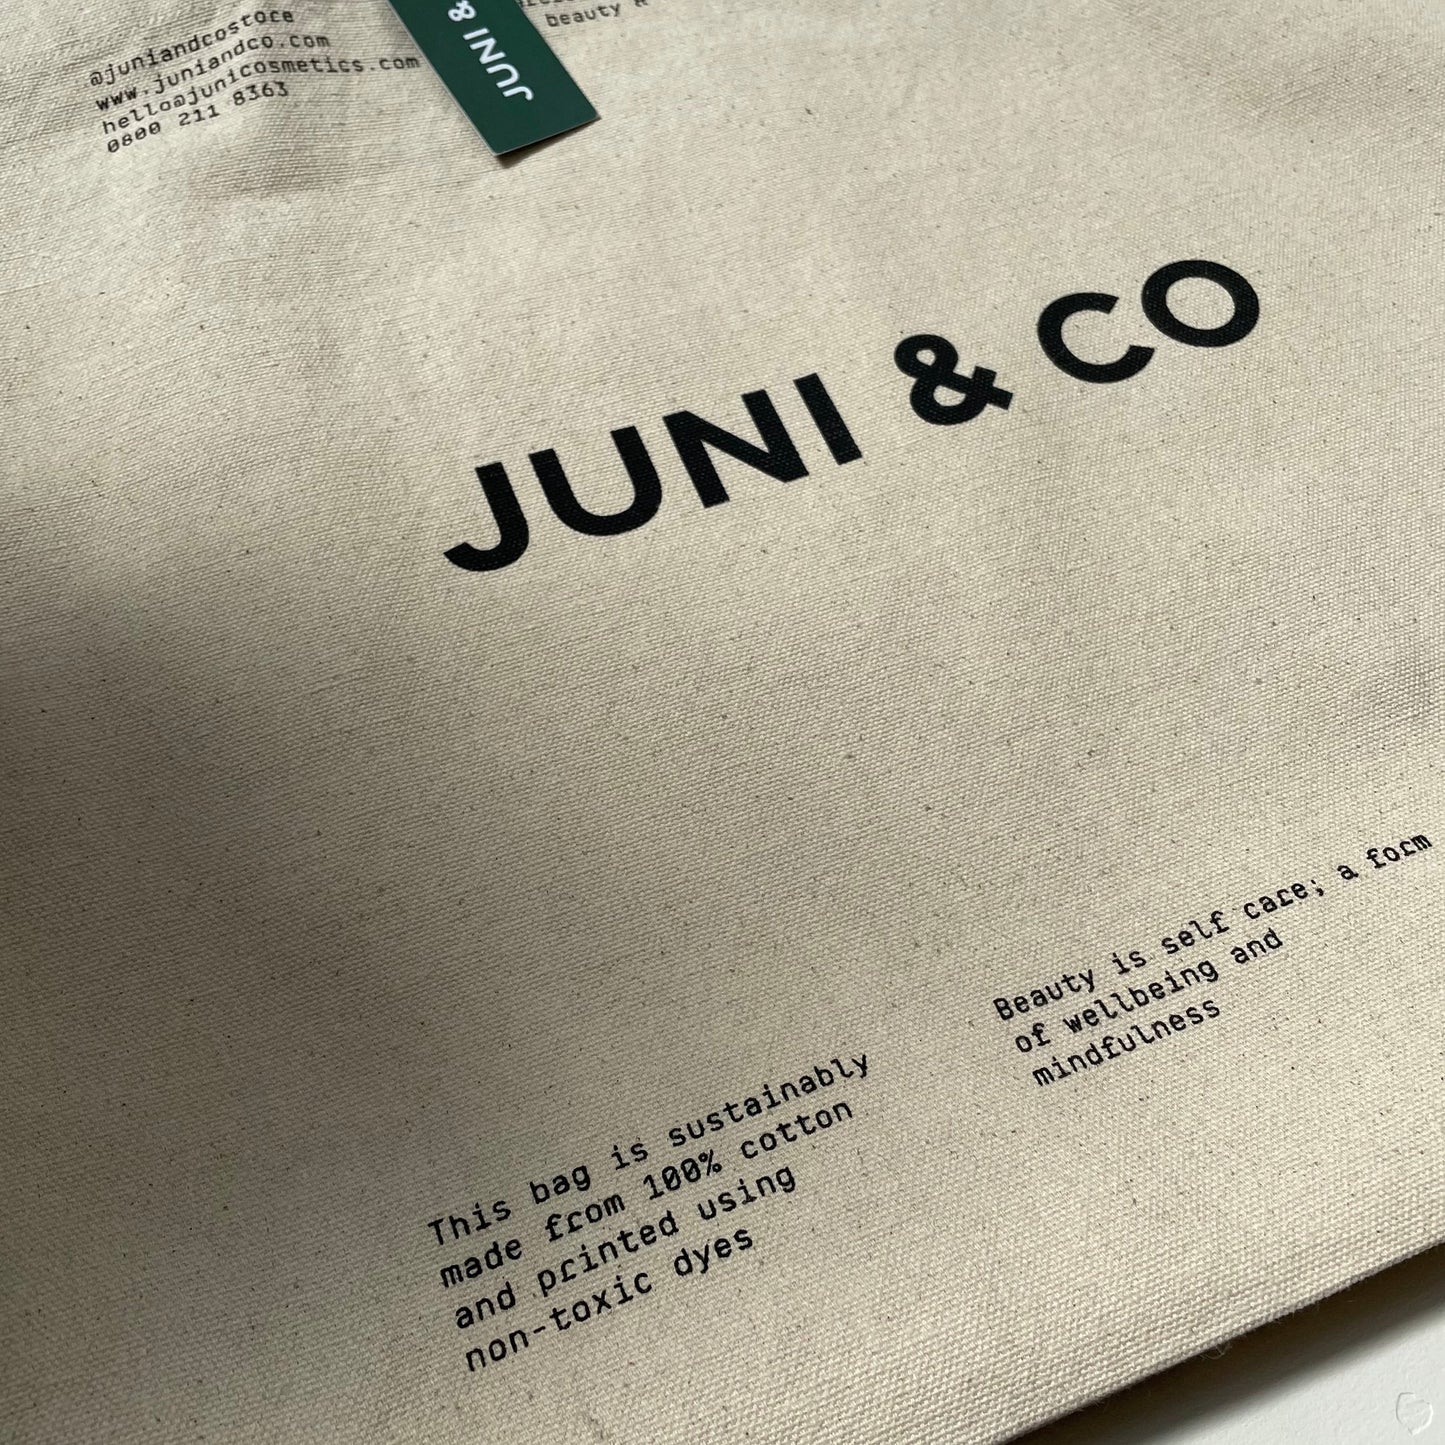 JUNI & CO Sustainably Made Tote Bag